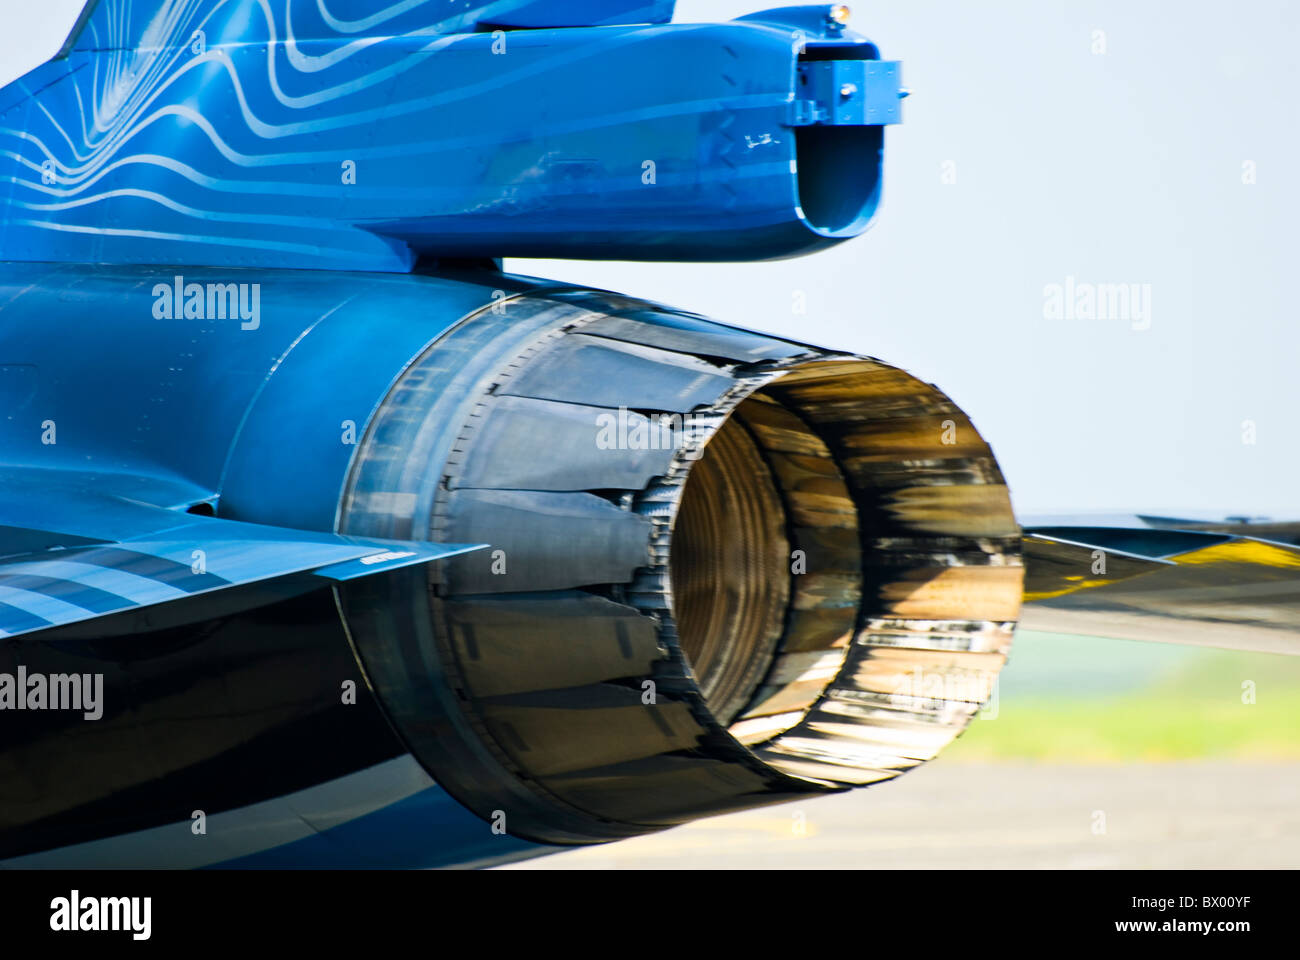 belgian-f-16a-f16-engine-outlet-exhaust-tail-close-up-showing-markings-BX00YF.jpg